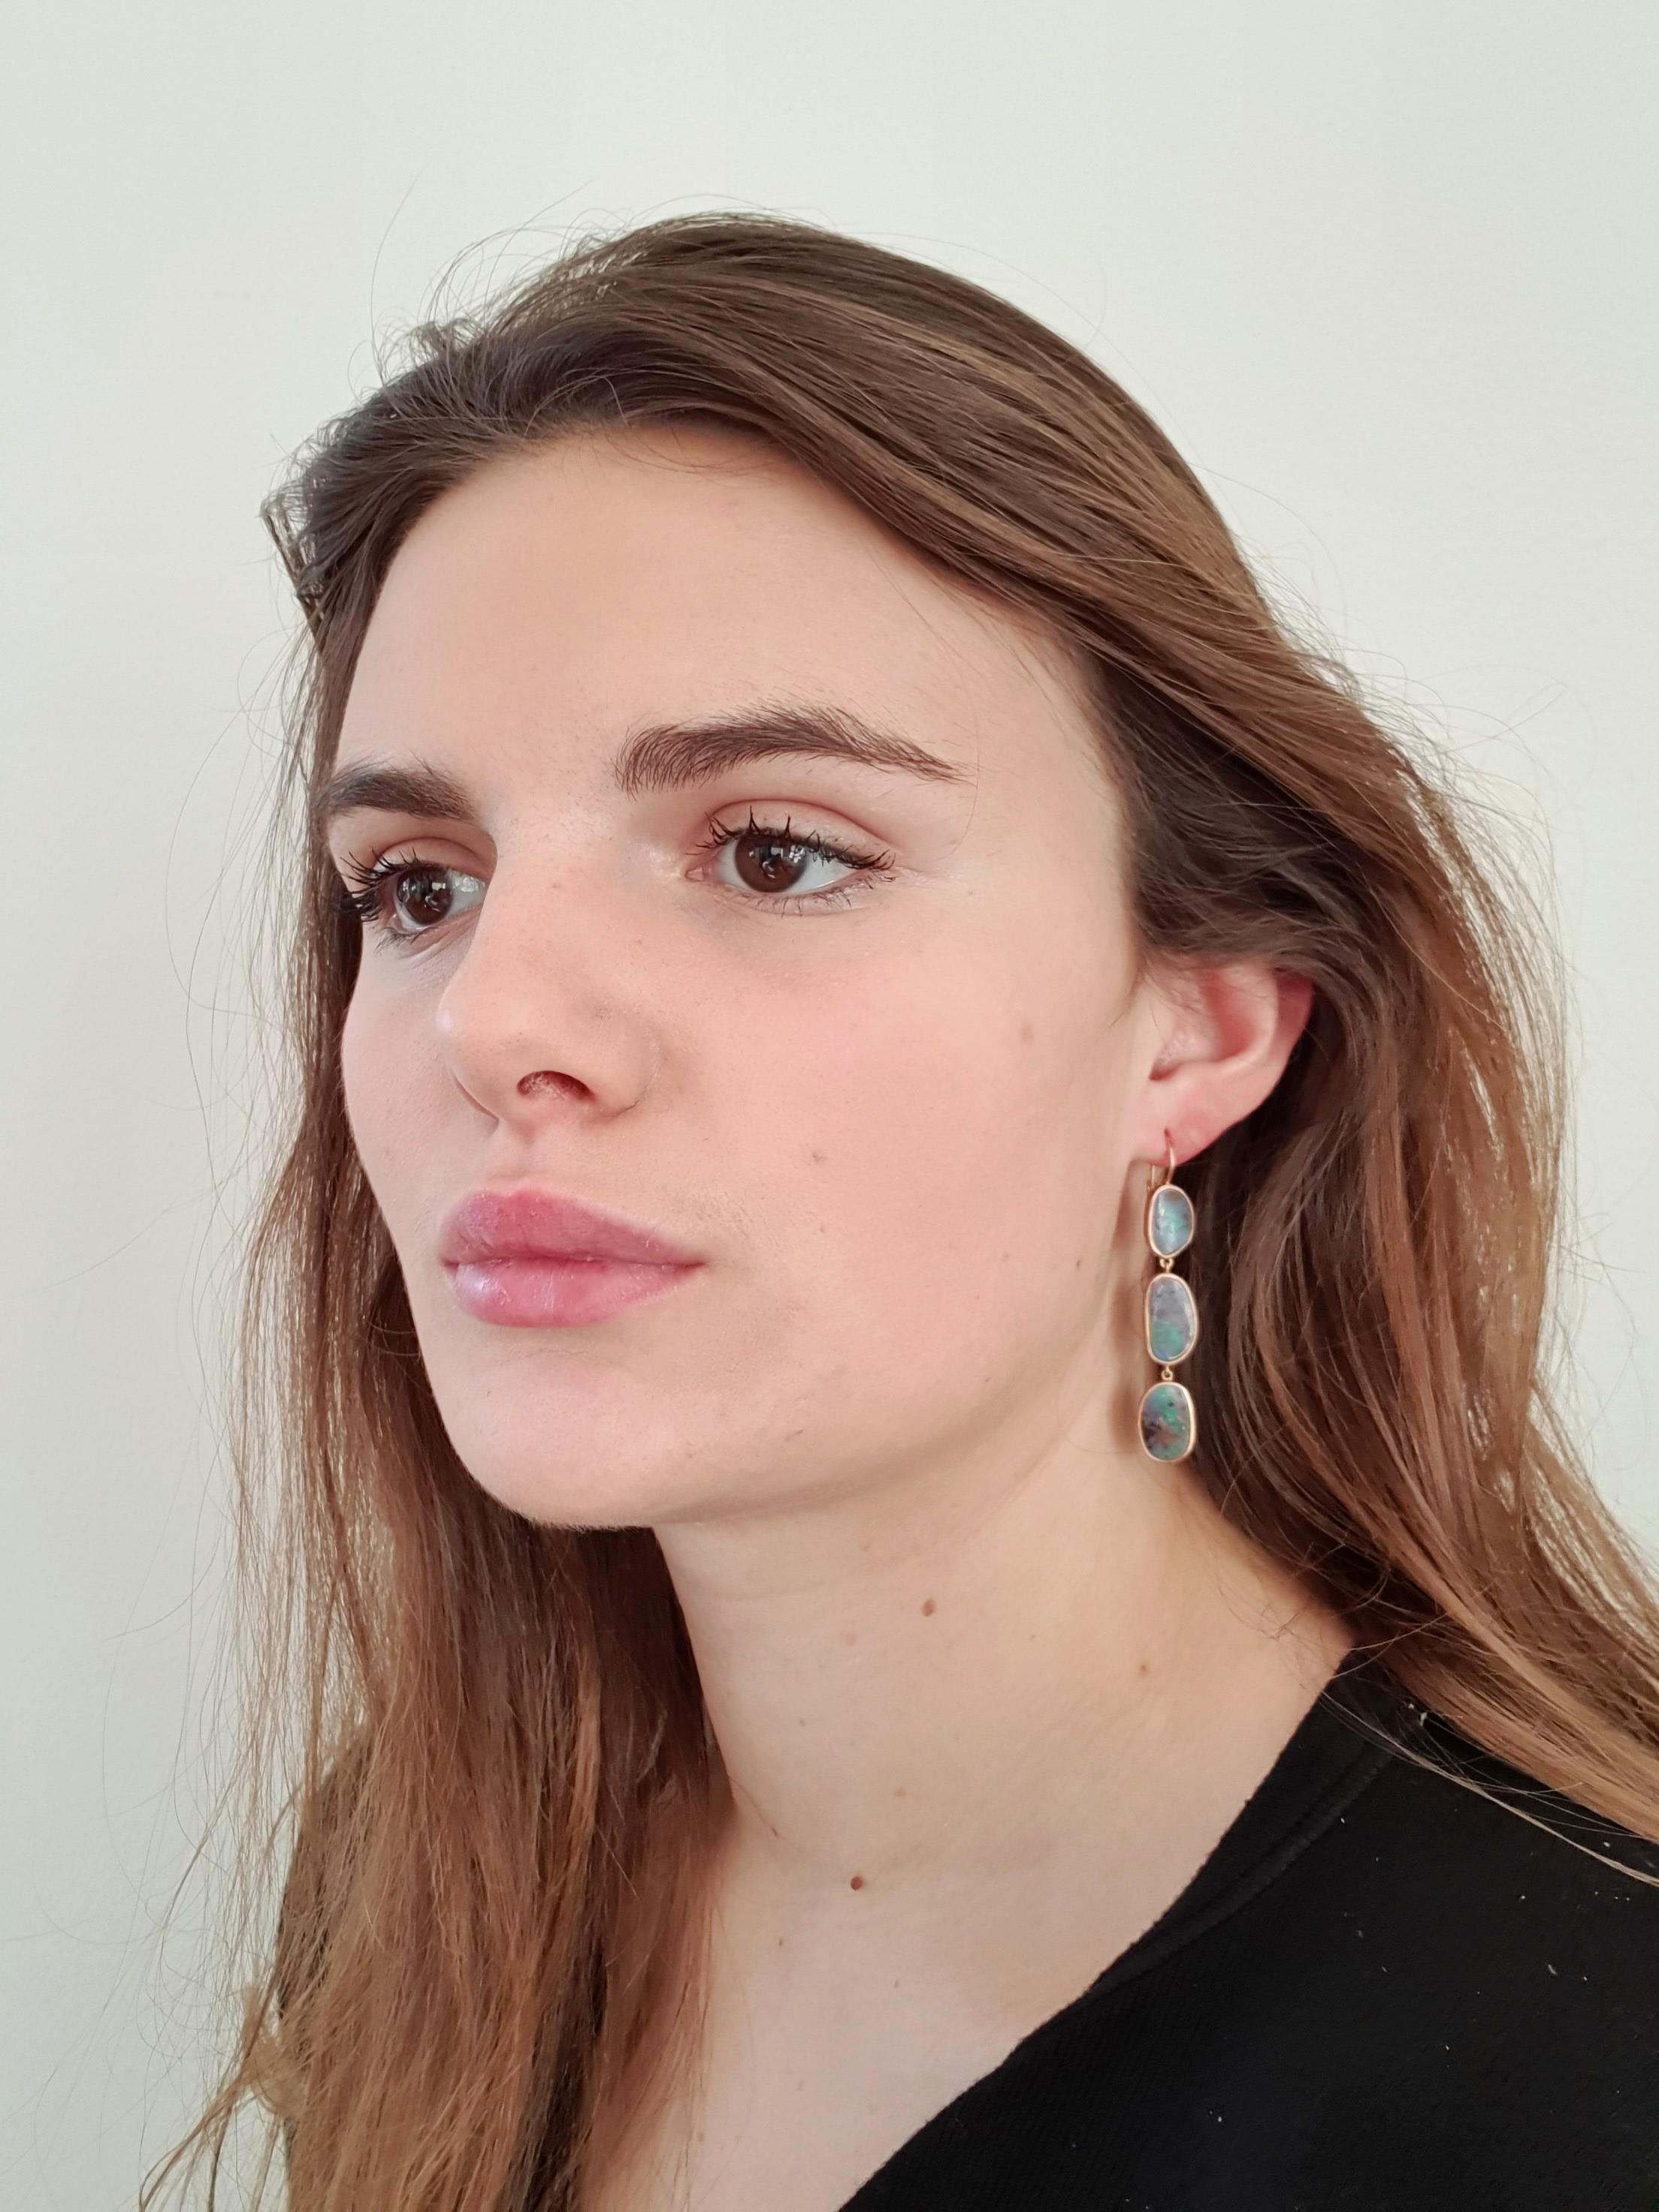 Dalben design One of a kind 18k rose gold matte finishing dangle earrings with six violet - green bezel set Australian Boulder Opals weighing 17,6 carats.  
max width 9,8 mm 
height without leverback 48 mm
height with leverback 57 mm  
The earrings